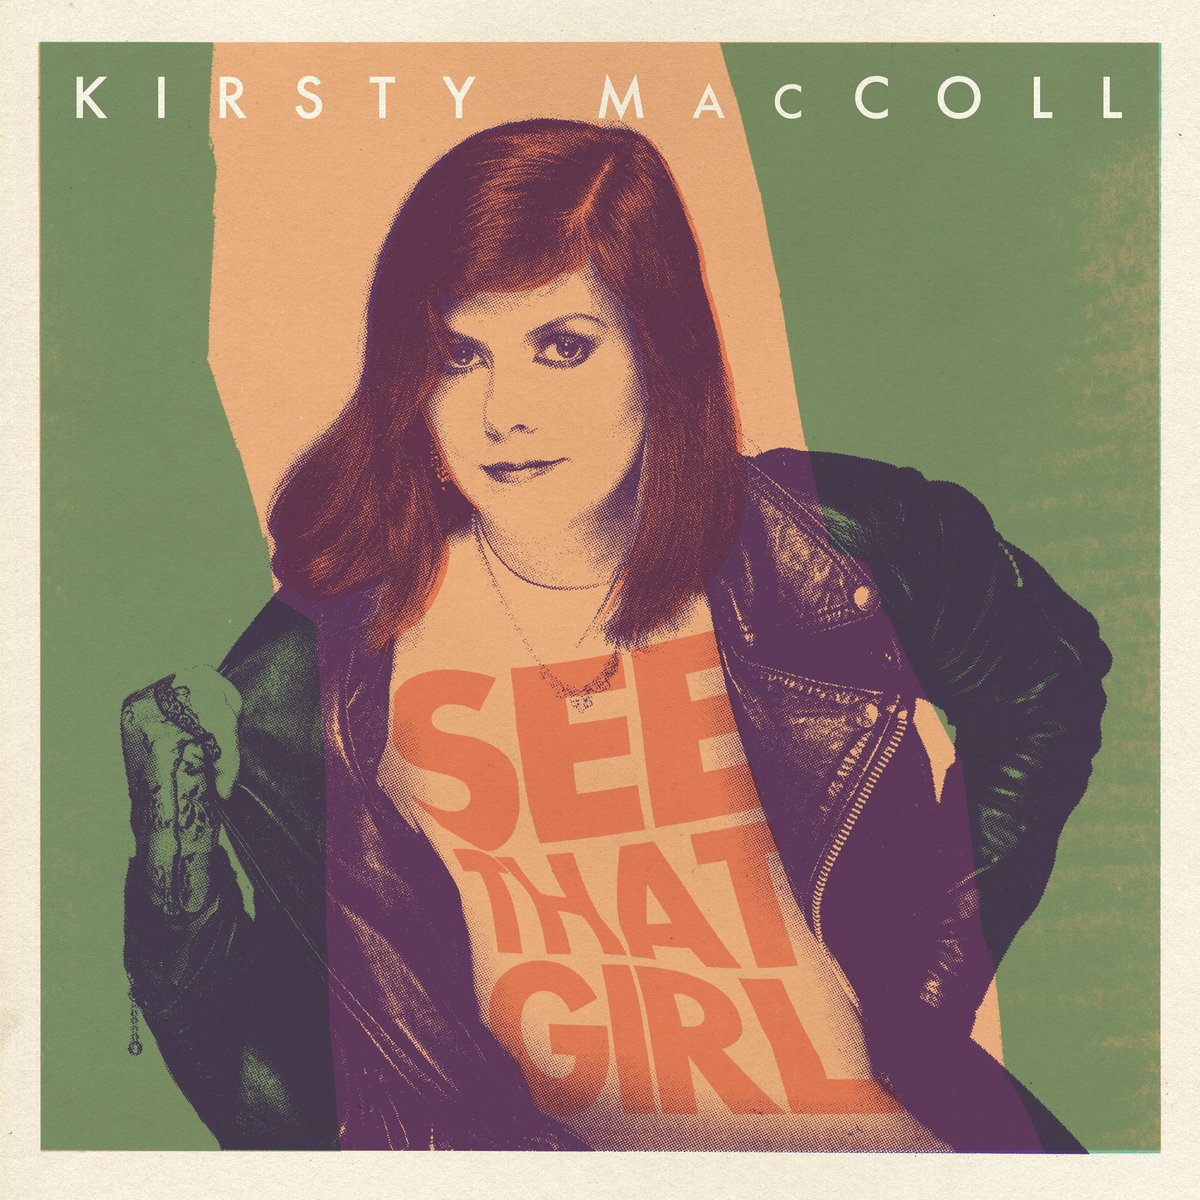 The fourth single from the upcoming ‘See That Girl’ 1979-2000 8CD Box Set from Kirsty MacColl, ‘England 2, Colombia 0’ (Live at the Jazz Café, London, 12 October 1999), is now available wherever you listen to music. KirstyMacColl.lnk.to/streamingTW #stiffrecords #kirstymaccoll